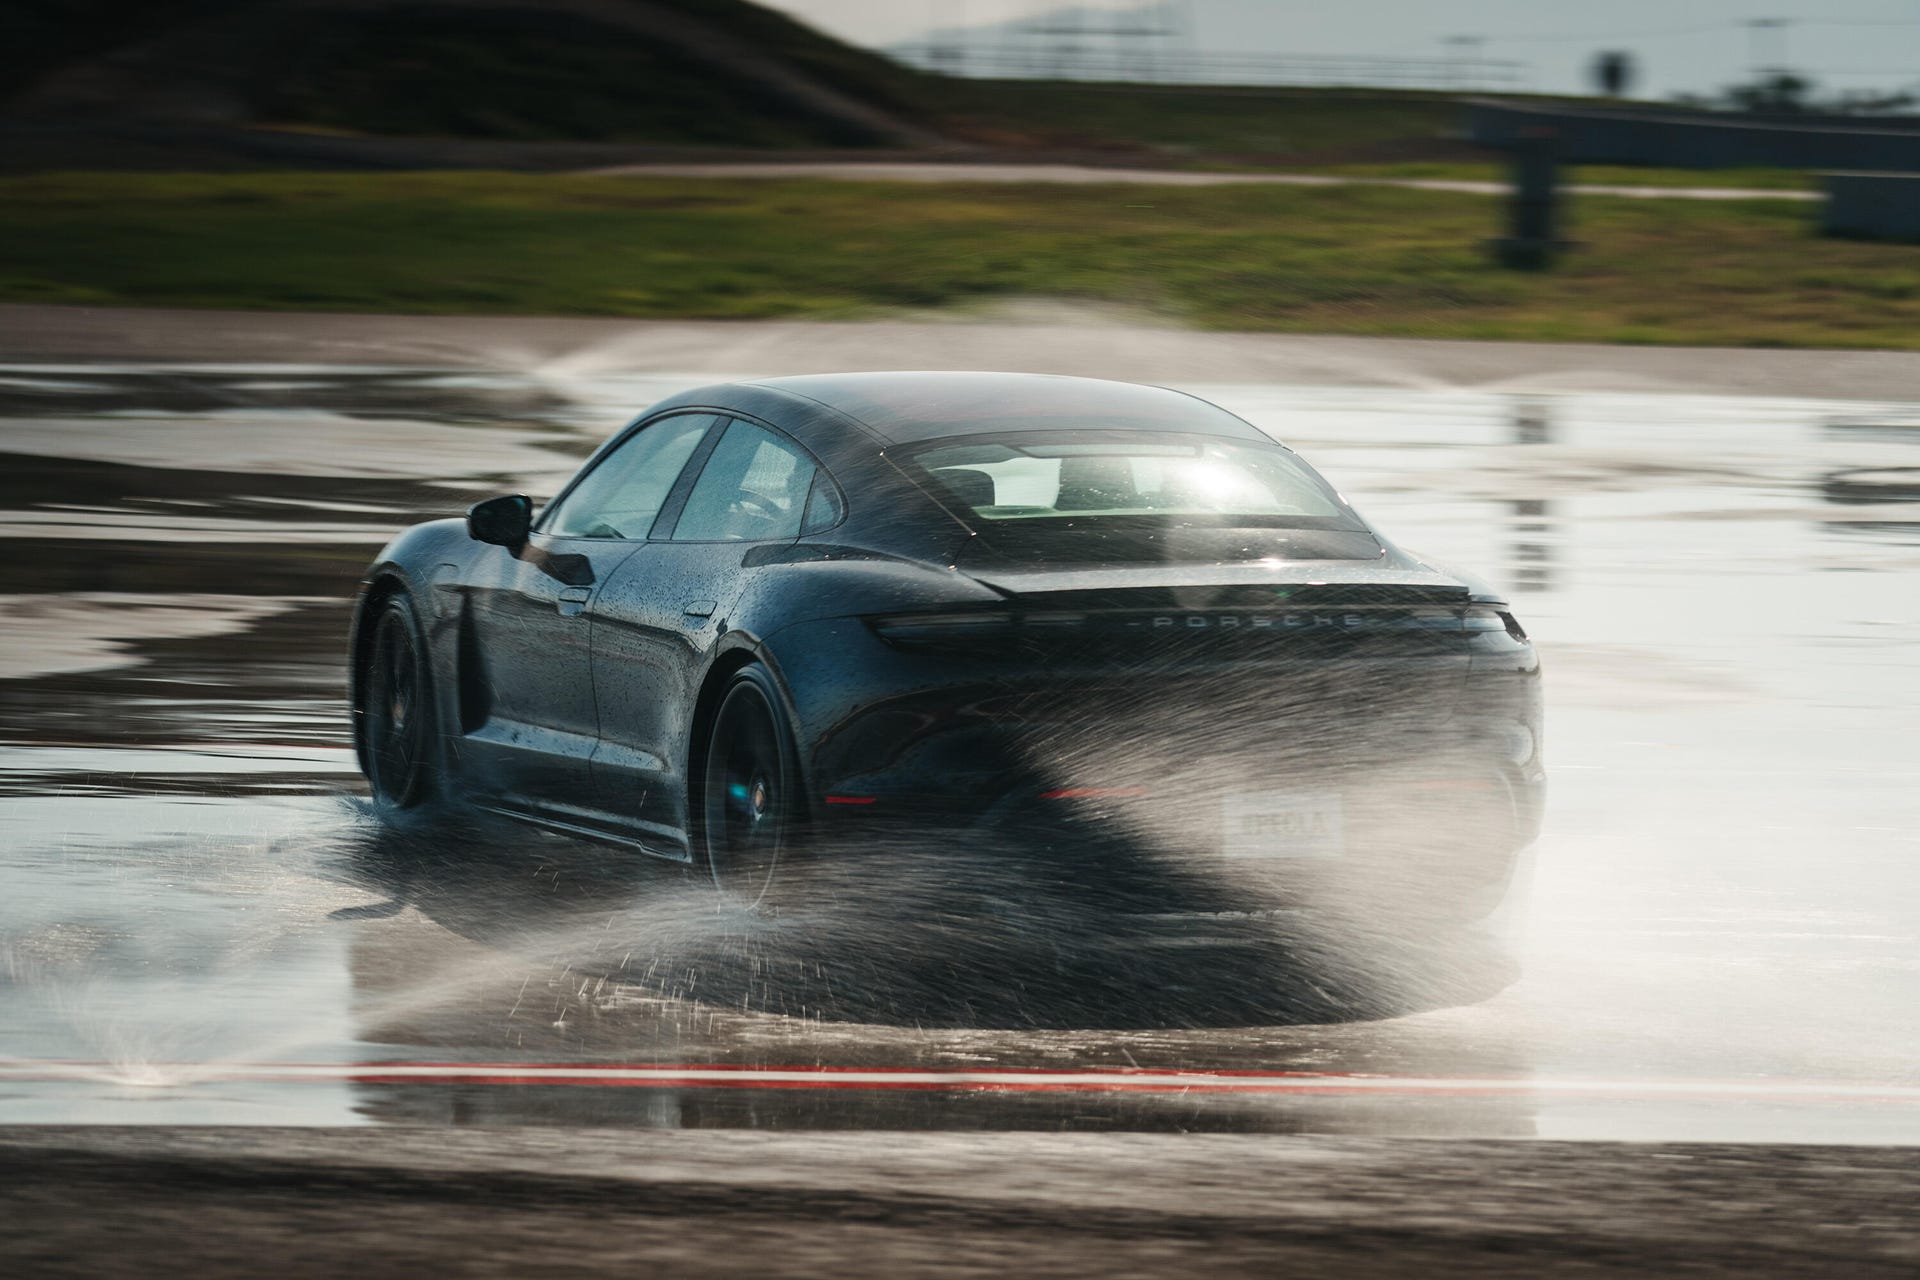 Taycan Turbo drifting in the wet at the Porsche Experience Center